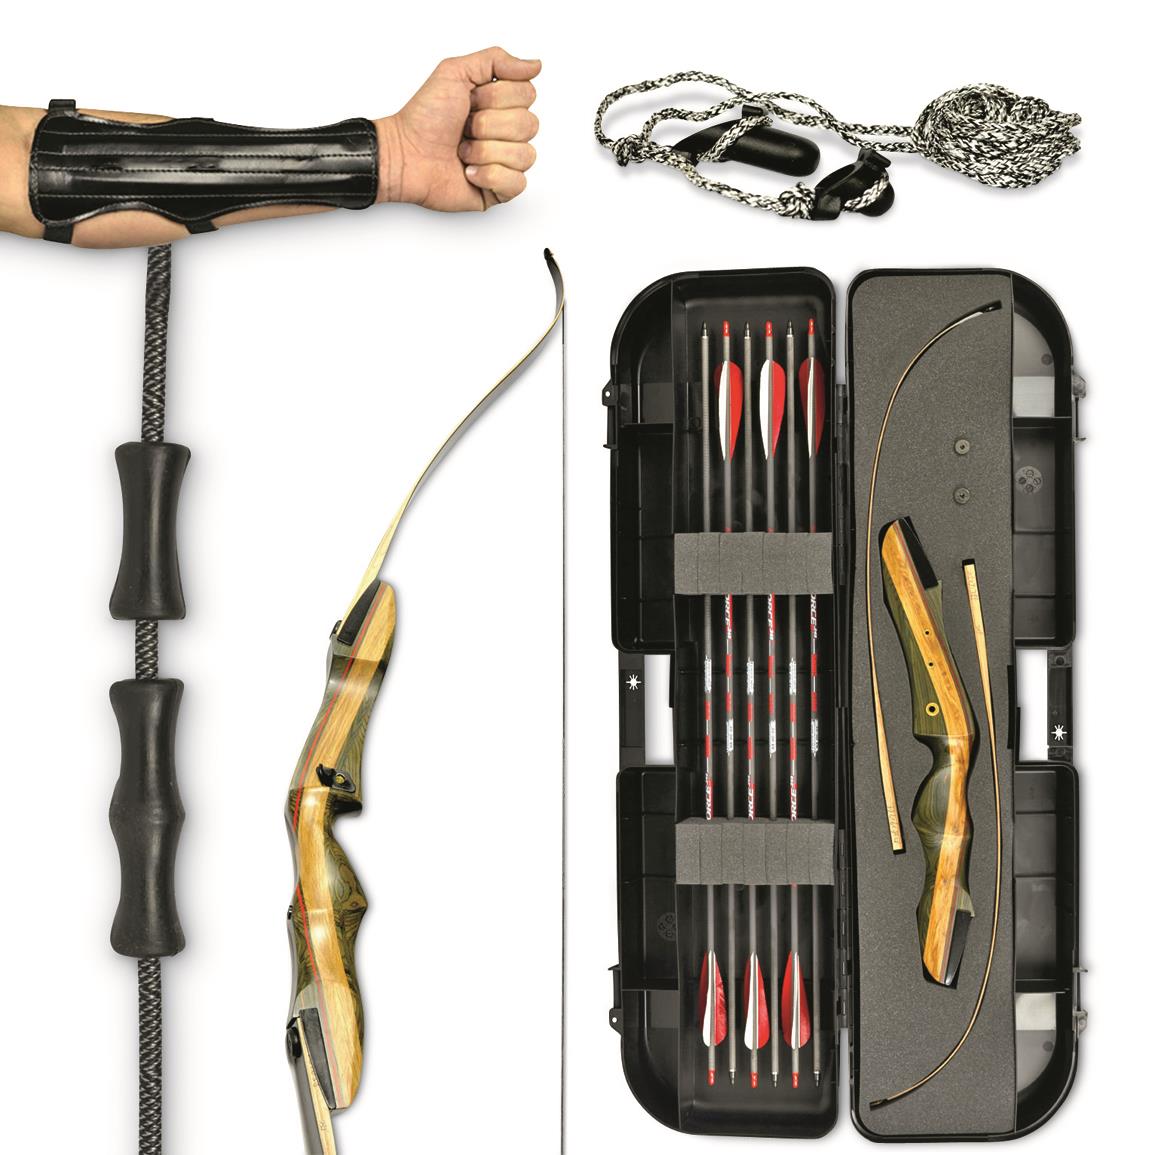 Southwest Archery Spyder Takedown Recurve Ready 2 Shoot Bowfishing Kit Includes Bow 35 45lb Weight Available 40 Right & Left Hand 